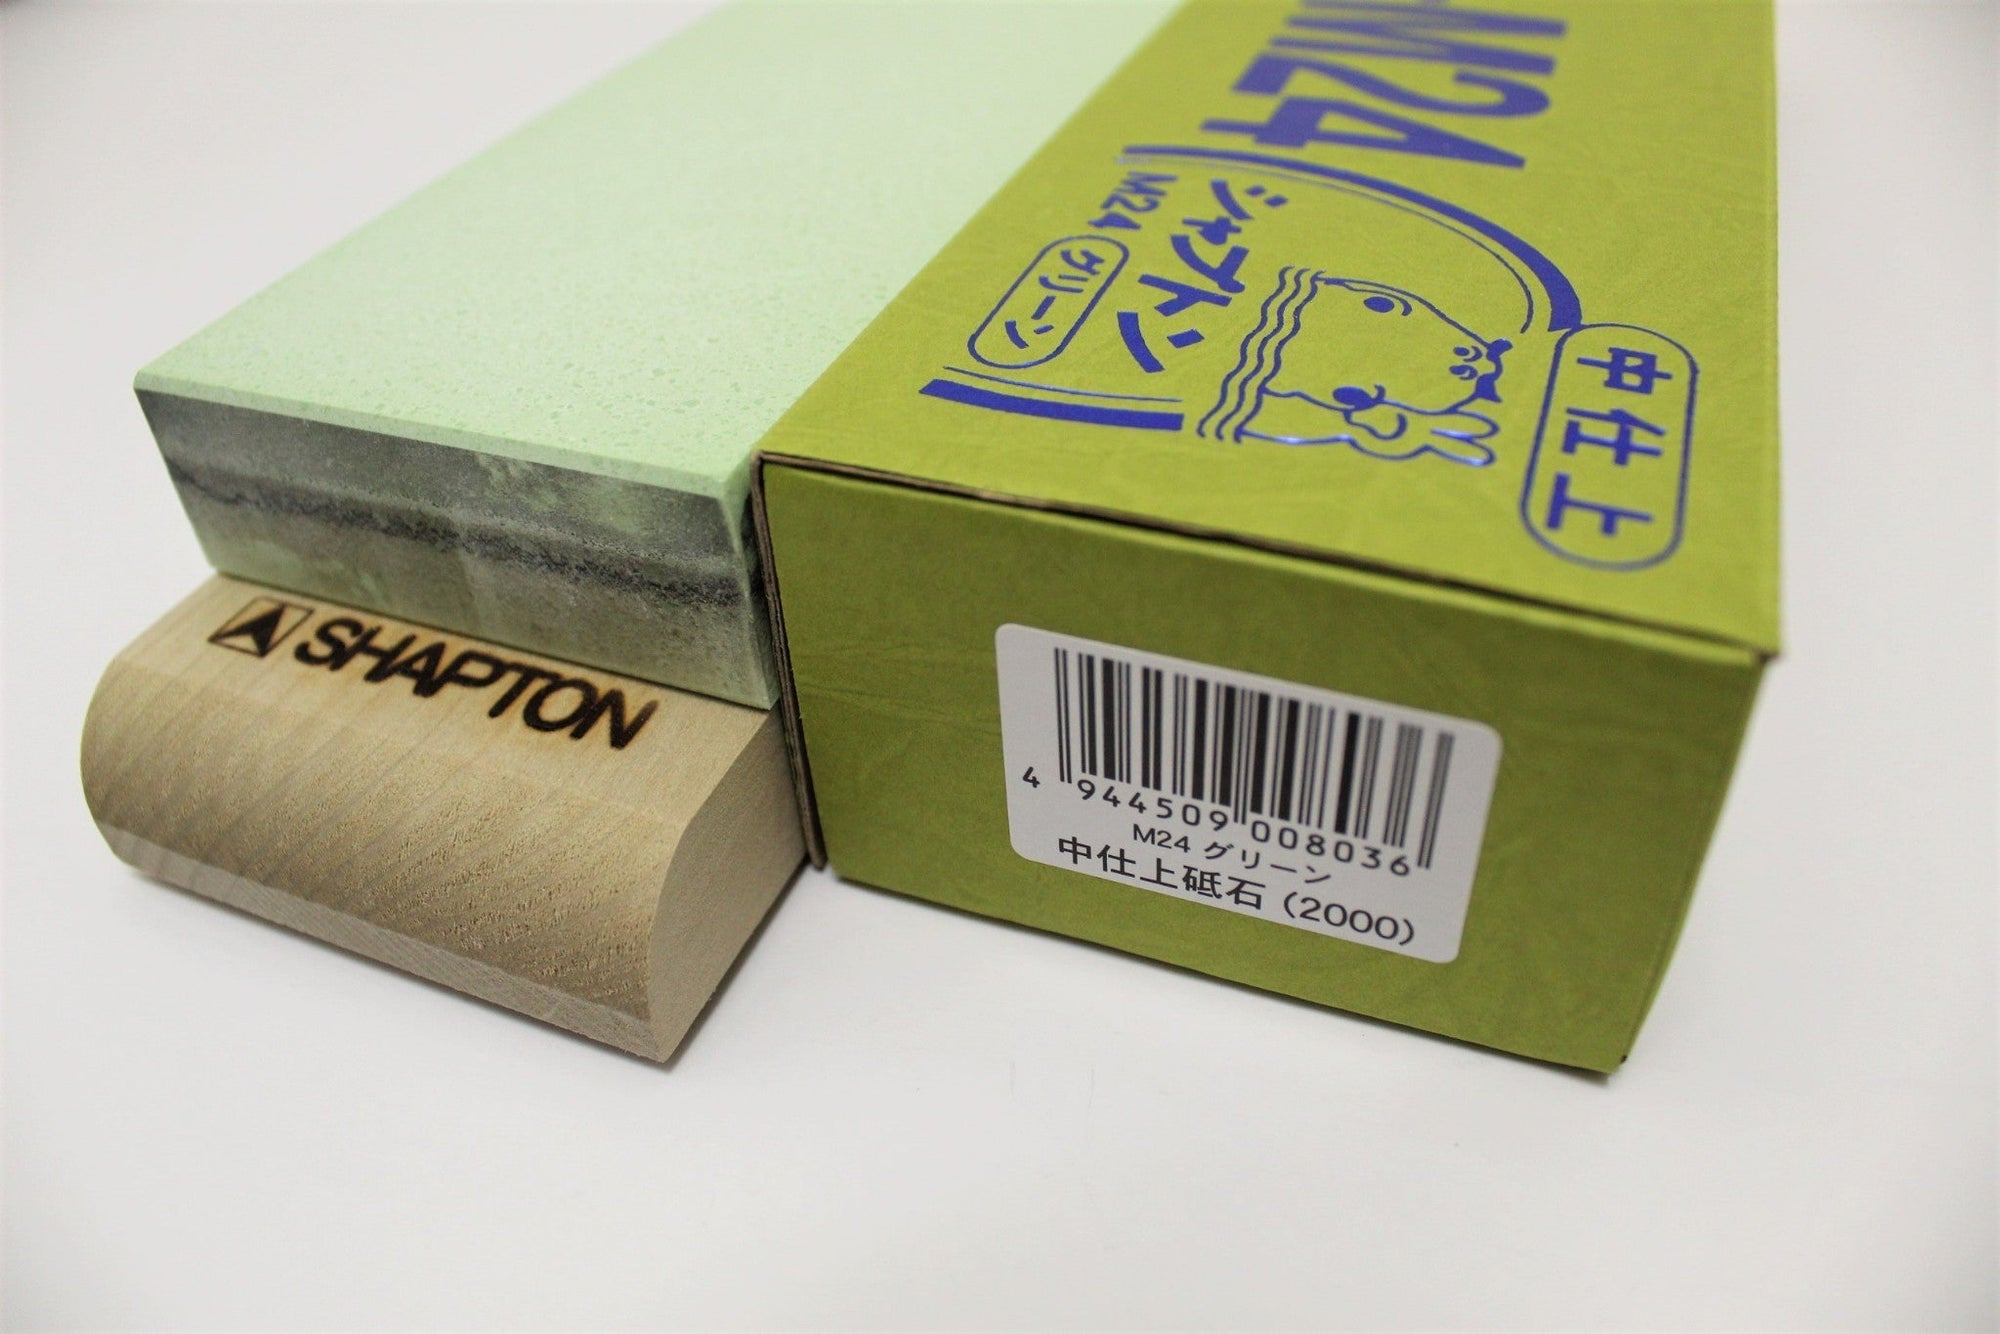 Accessories - Shapton Japanese Sharpening Stone With Base - Grit #2000